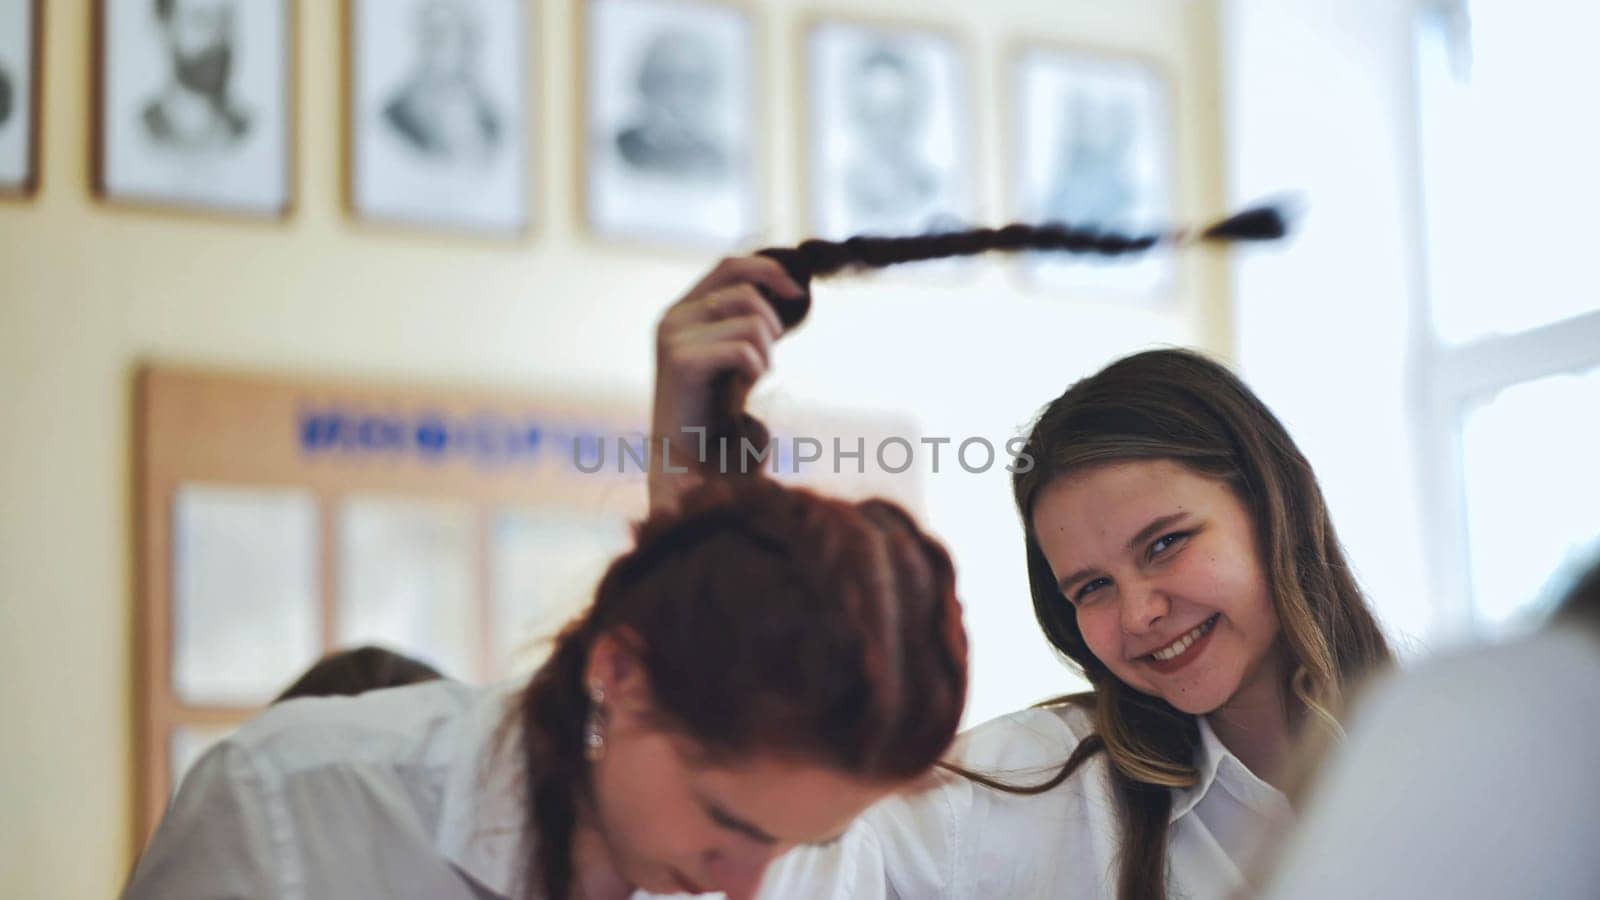 Fun schoolgirls in the classroom. Girl playing with her friend's pigtail